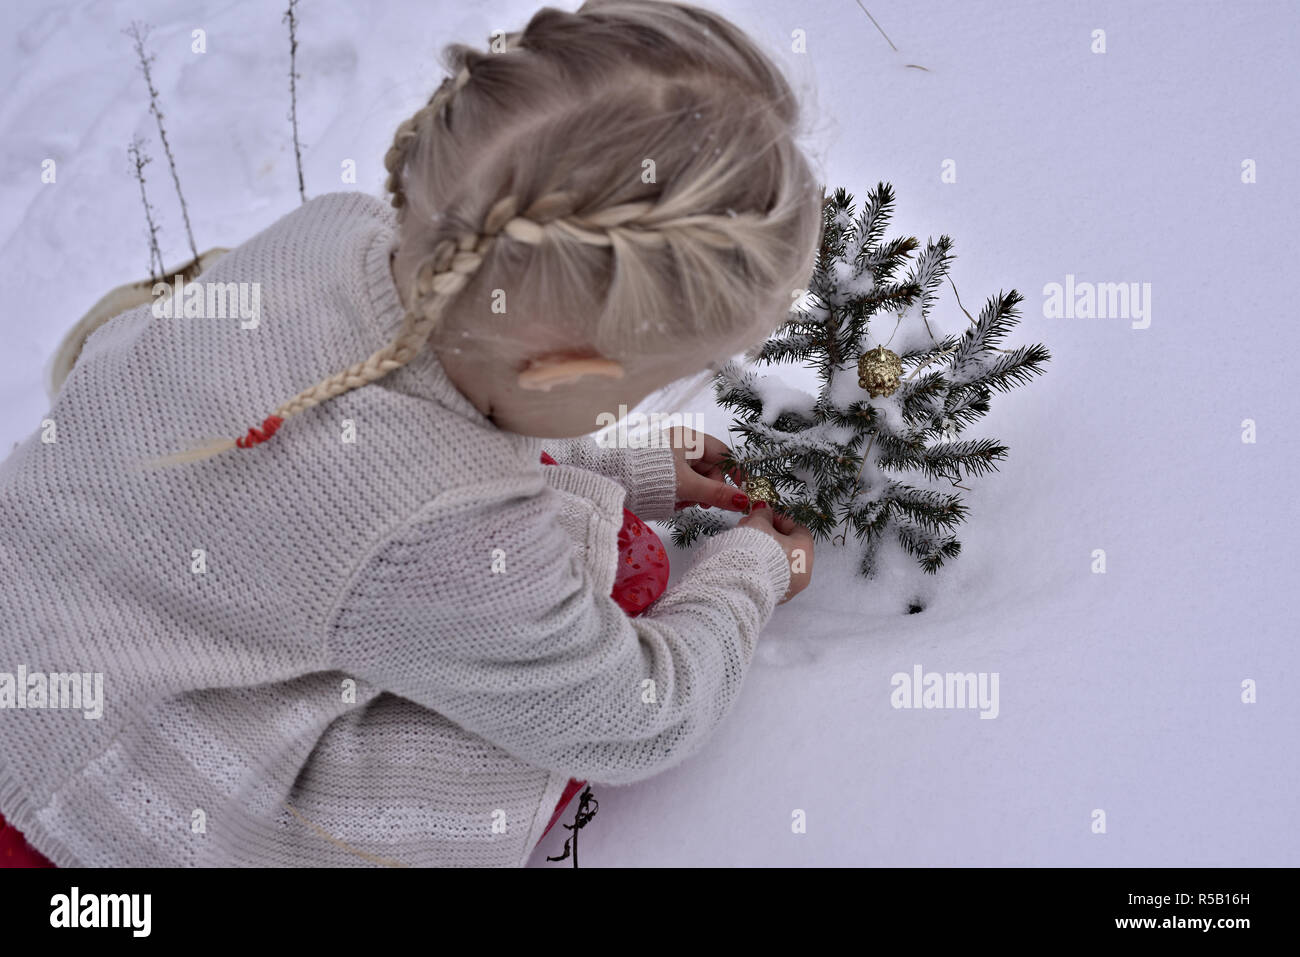 Beautiful little girl finds the spirit of Christmas by decorating an outdoor pine tree fluffed in snow Stock Photo